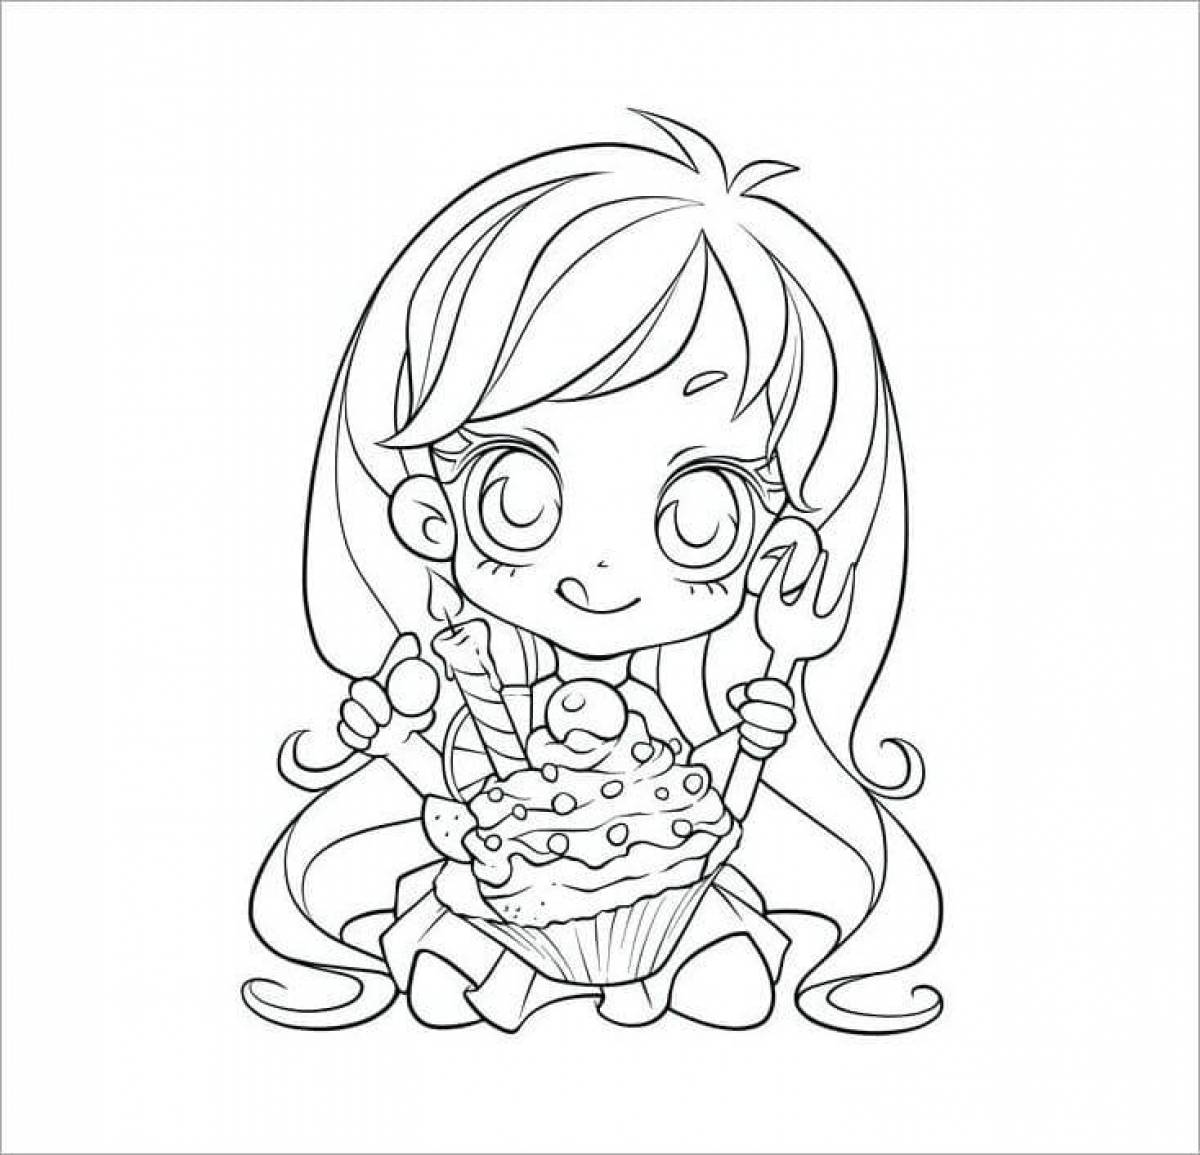 Bright chibi coloring page